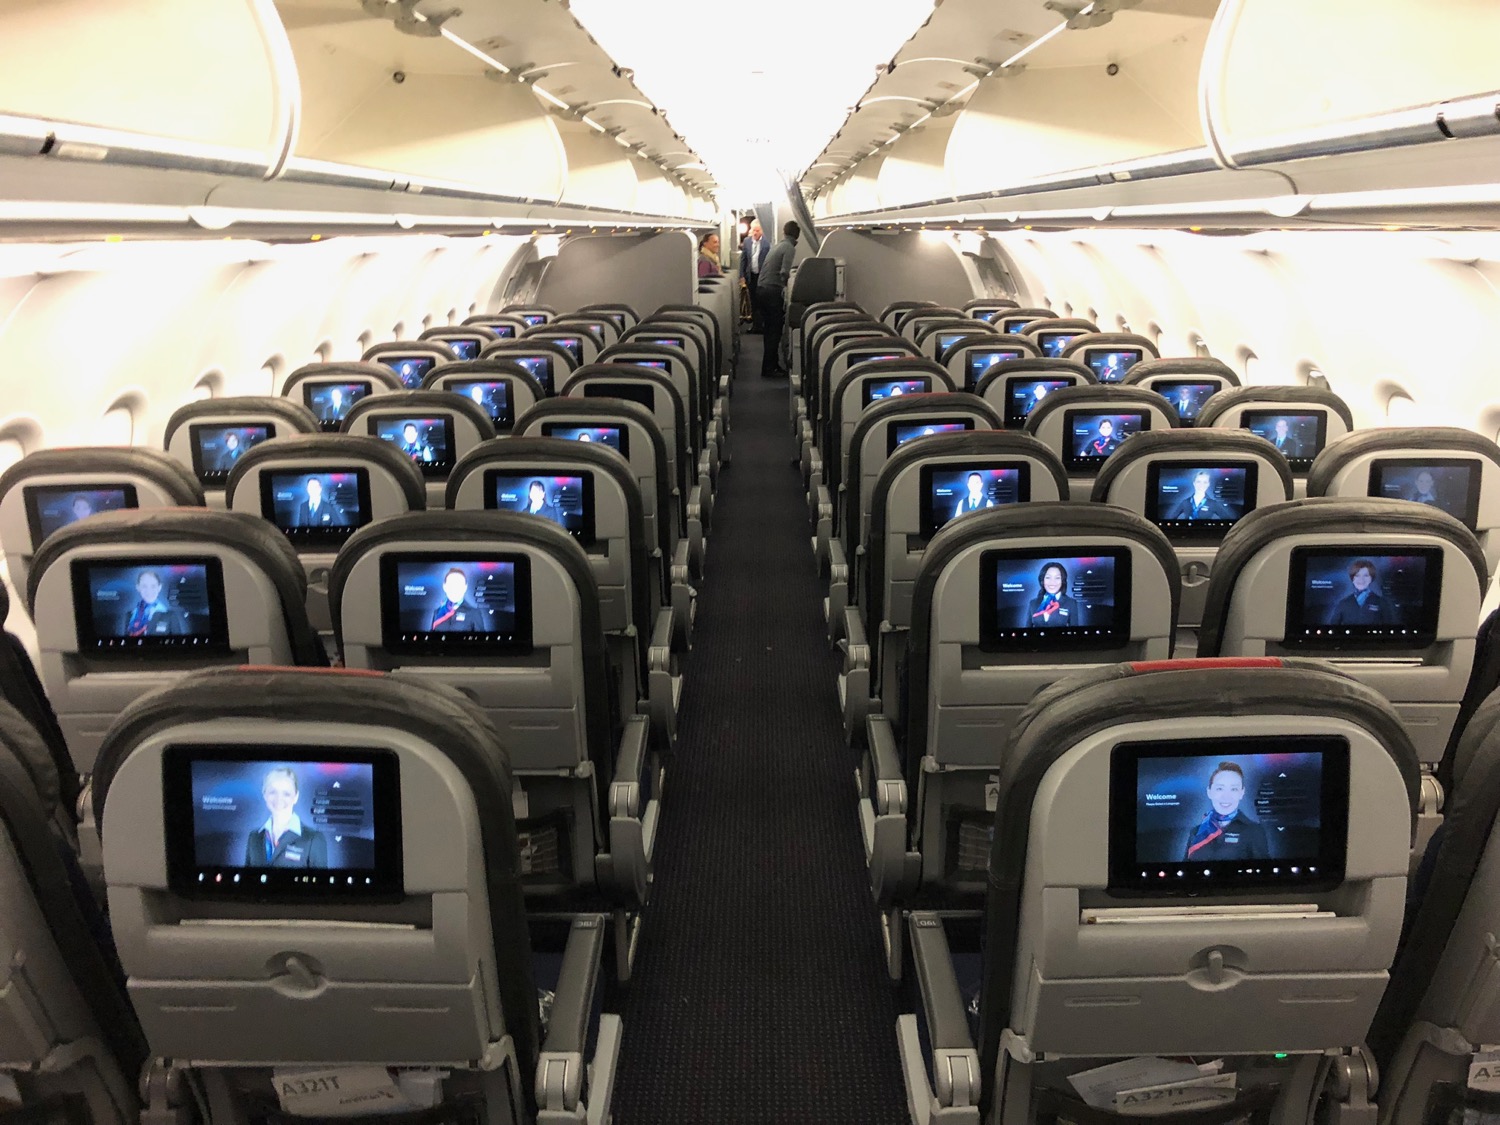 rows of seats with screens on the back